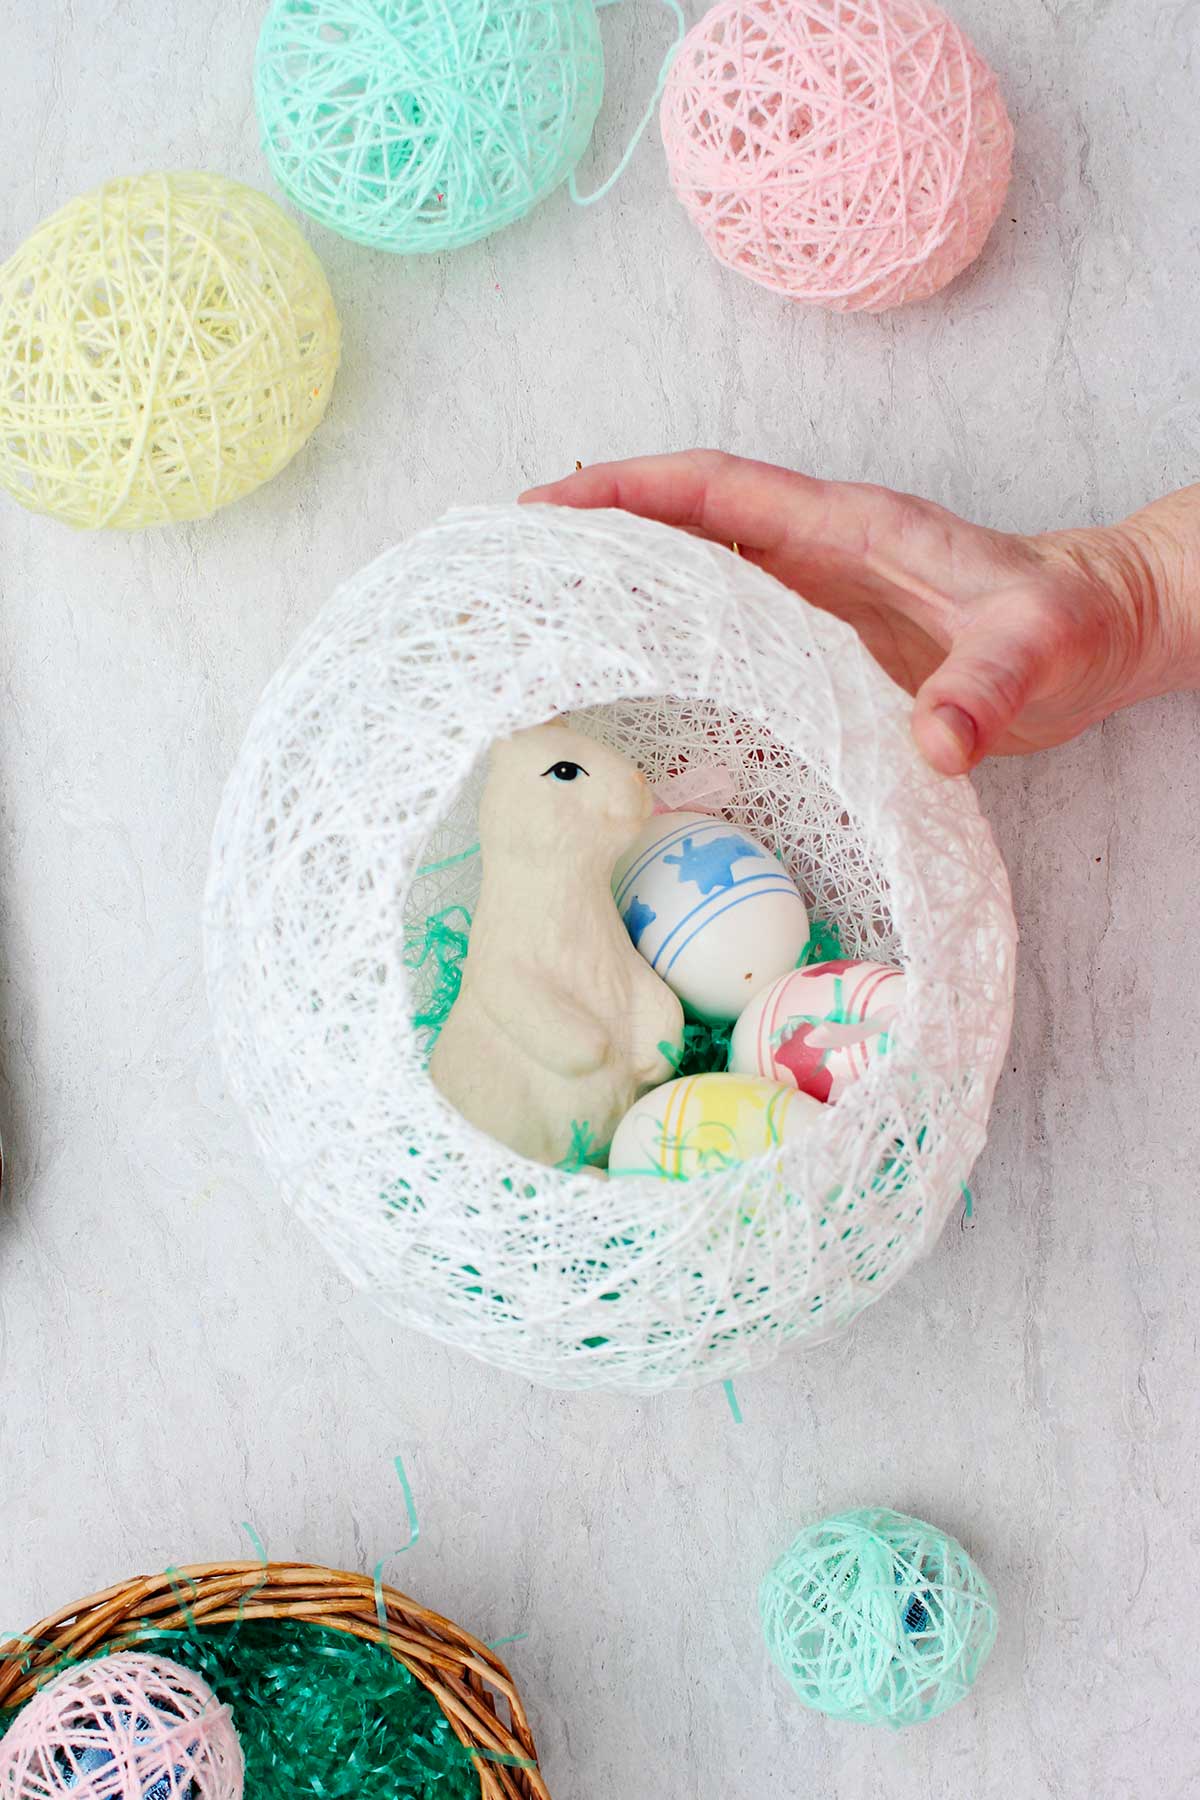 Hand holding white string egg with bunny and Easter eggs inside with other string eggs around it.